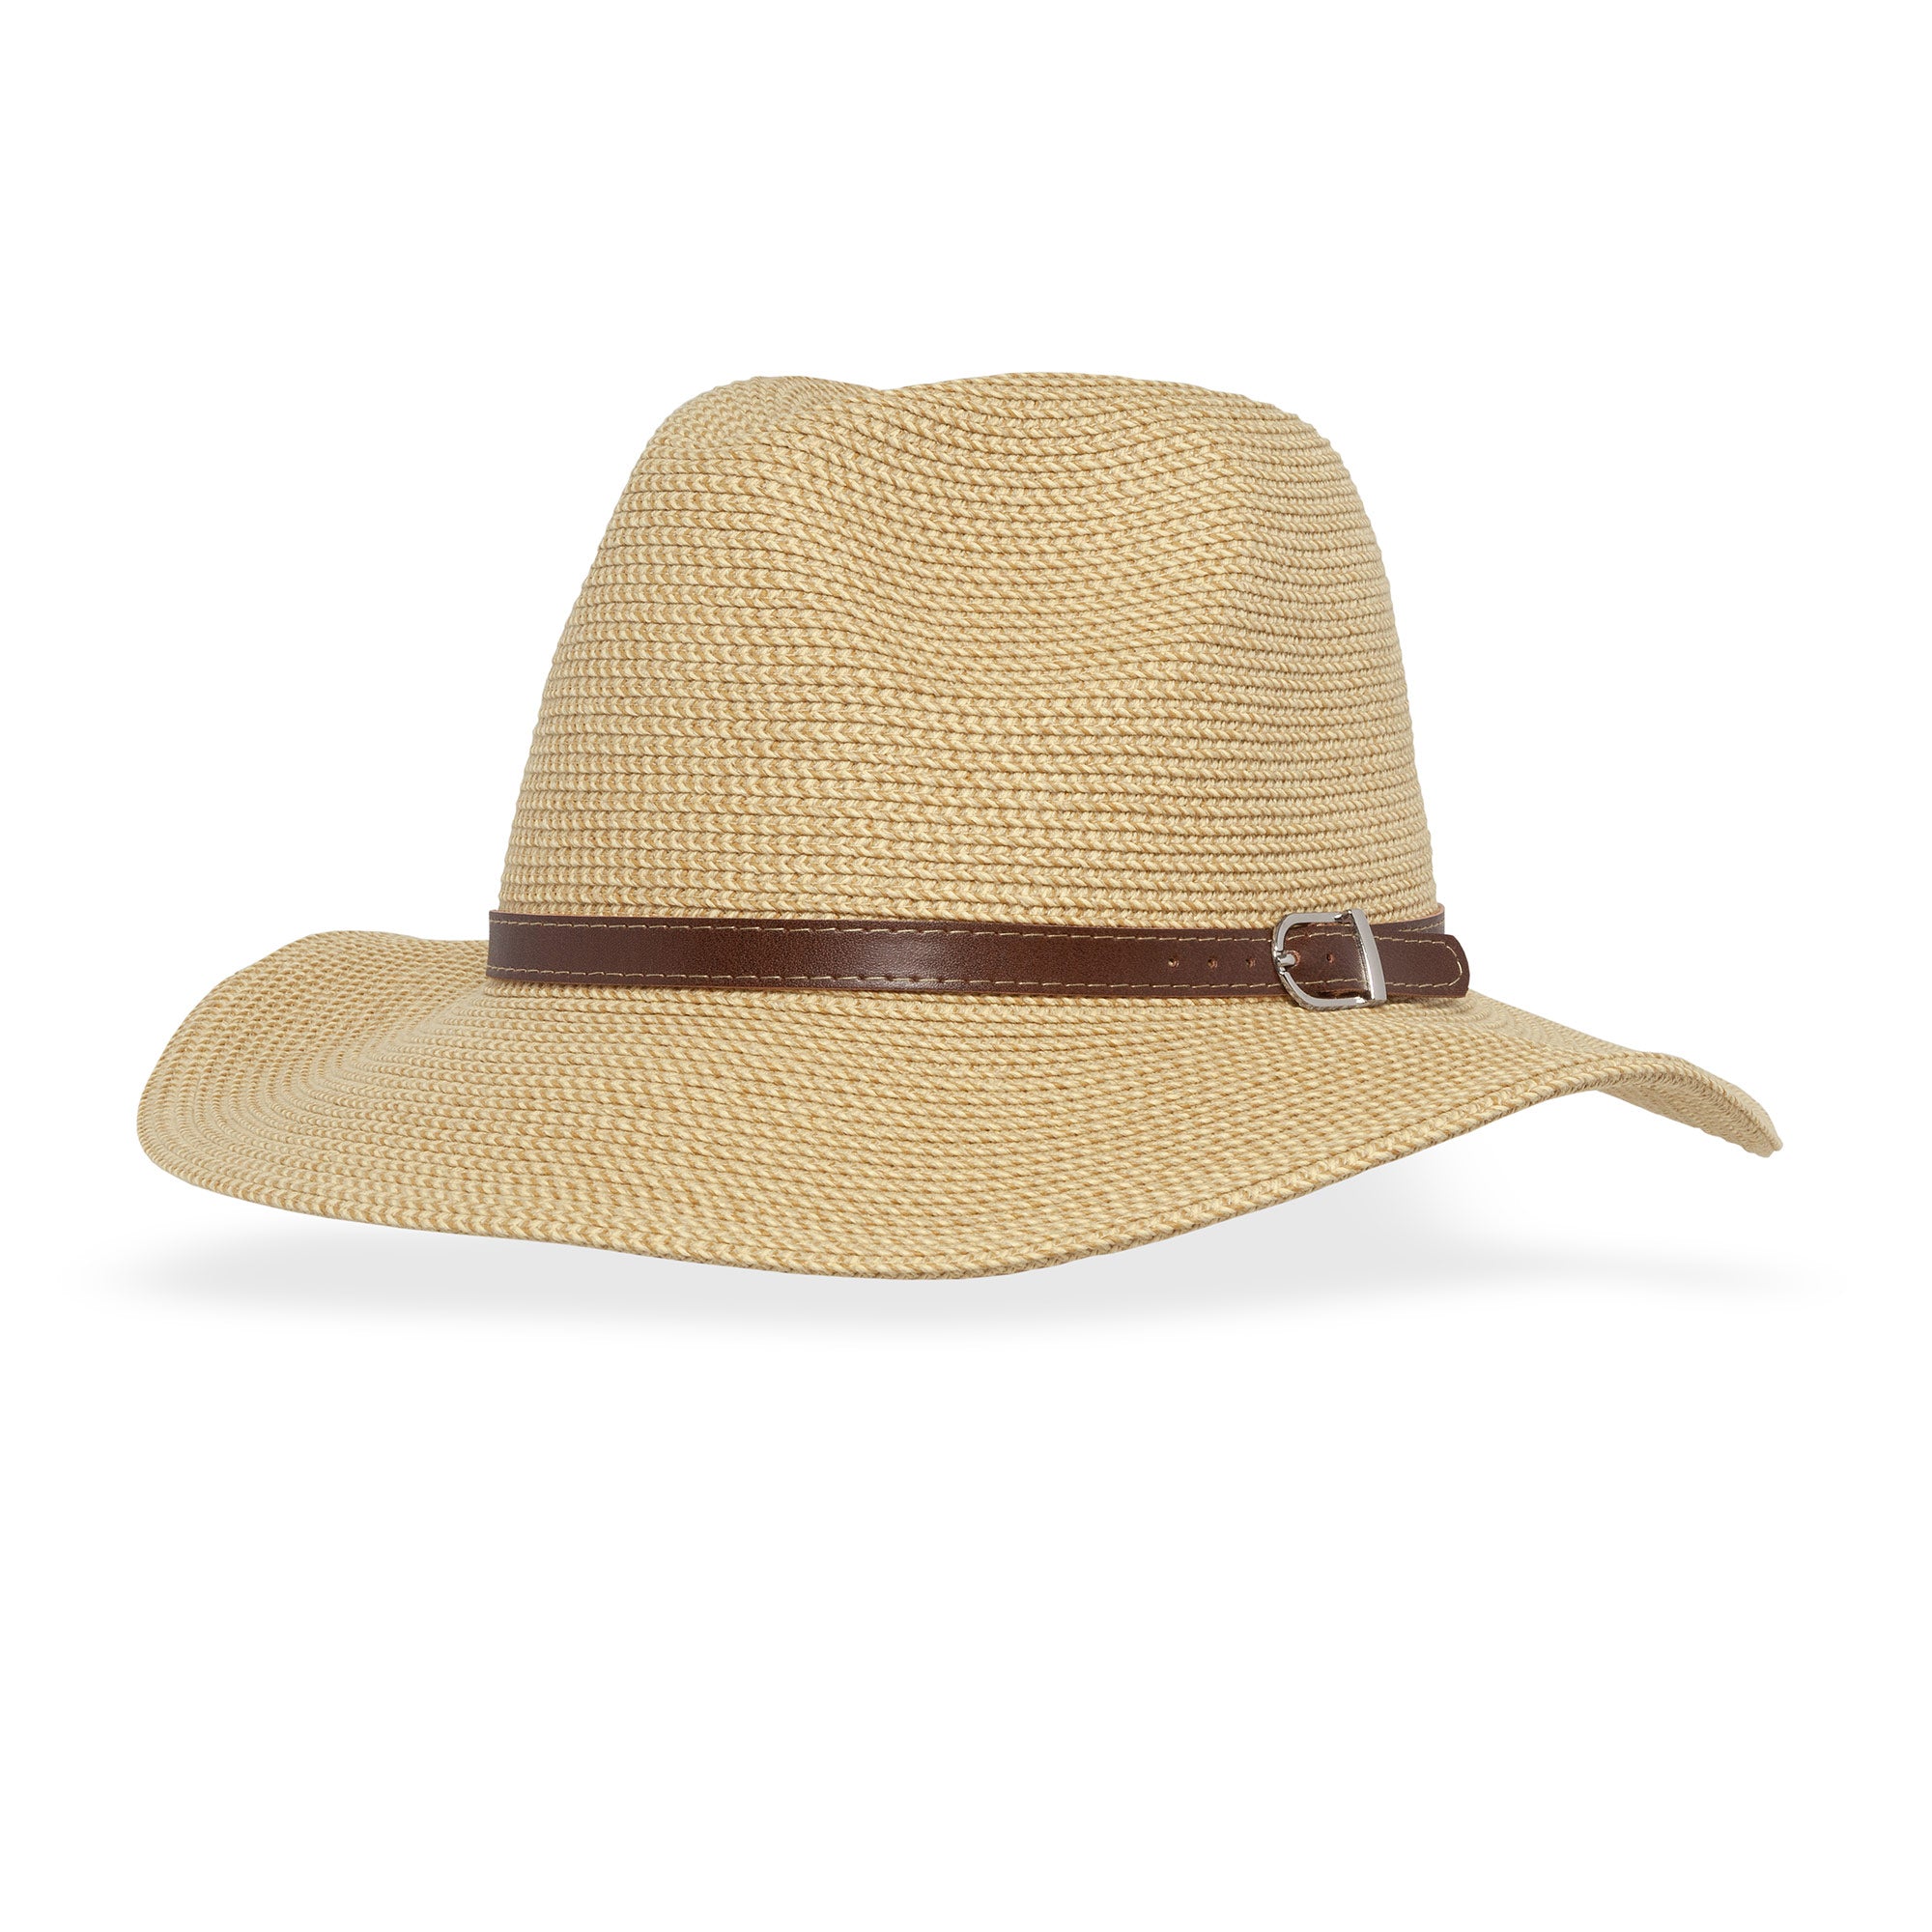 a photo of the sunday afternoons women's coronado hat in natural, front view